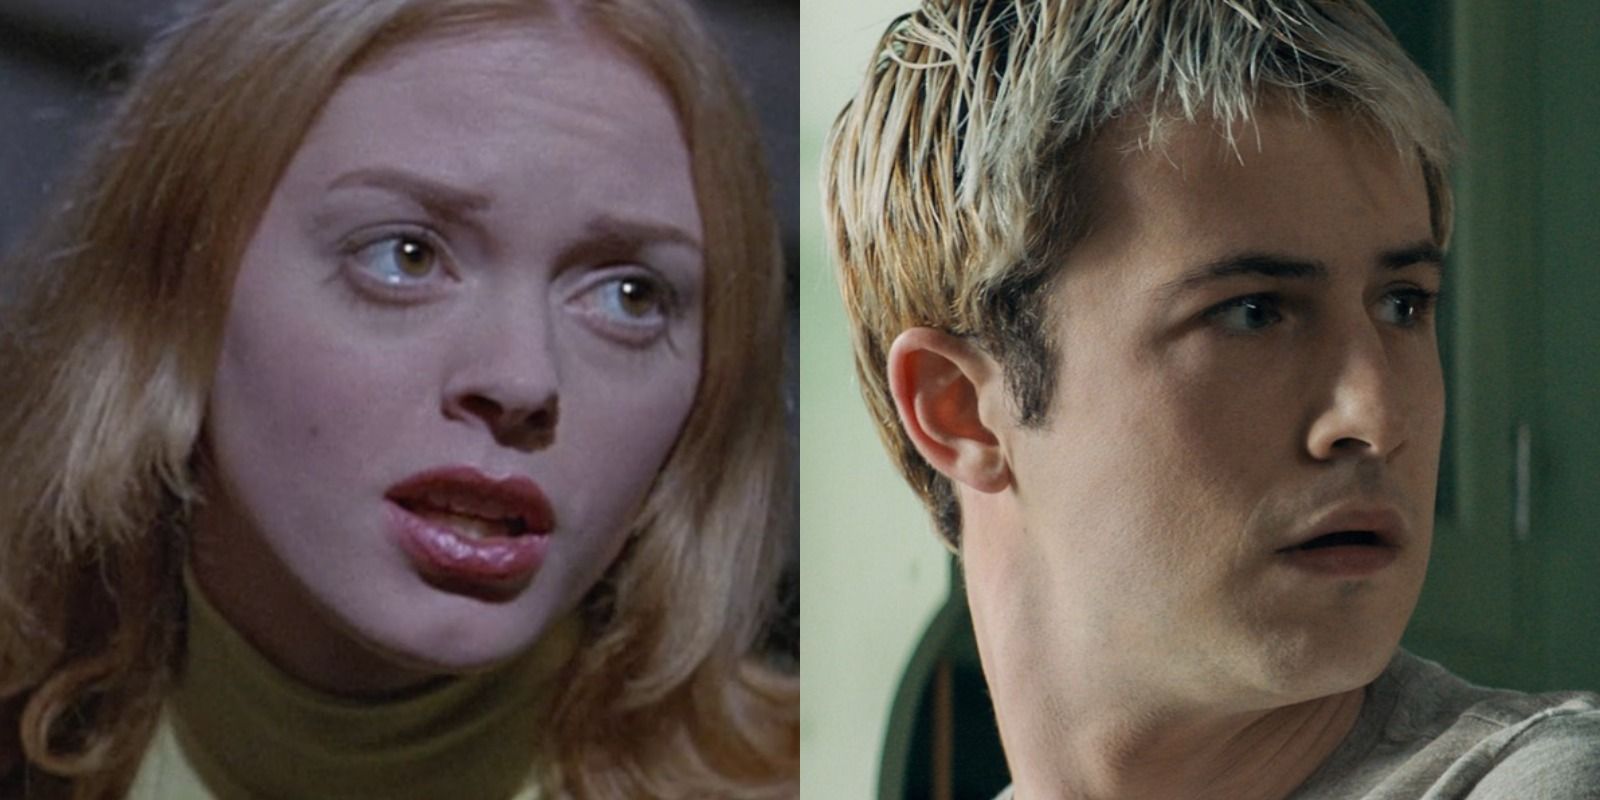 Split image featuring Tatum Riley on the left and Wes Hicks on the right in the Scream franchise